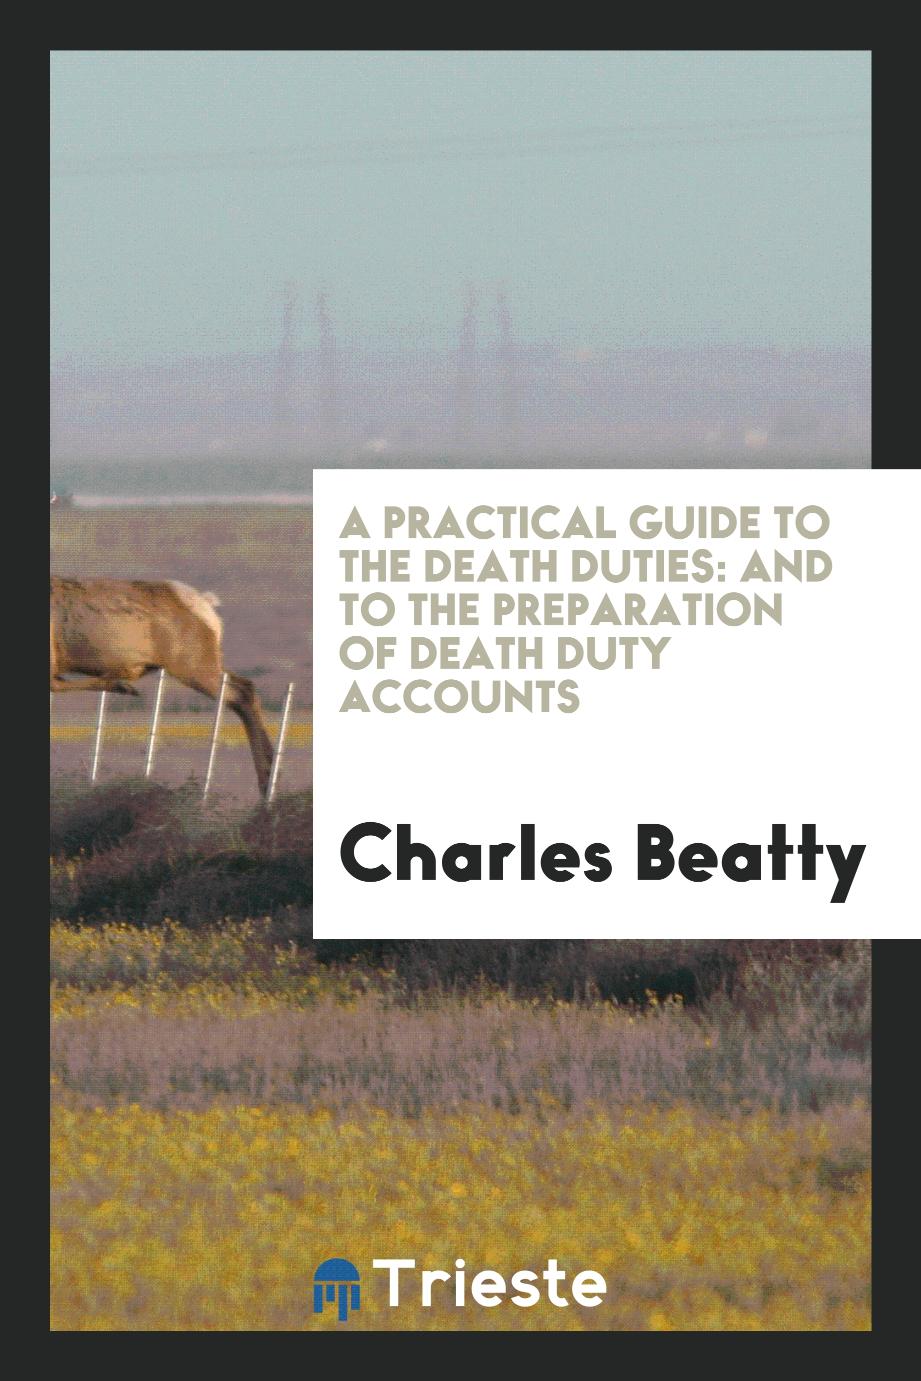 A practical guide to the death duties: and to the preparation of death duty accounts